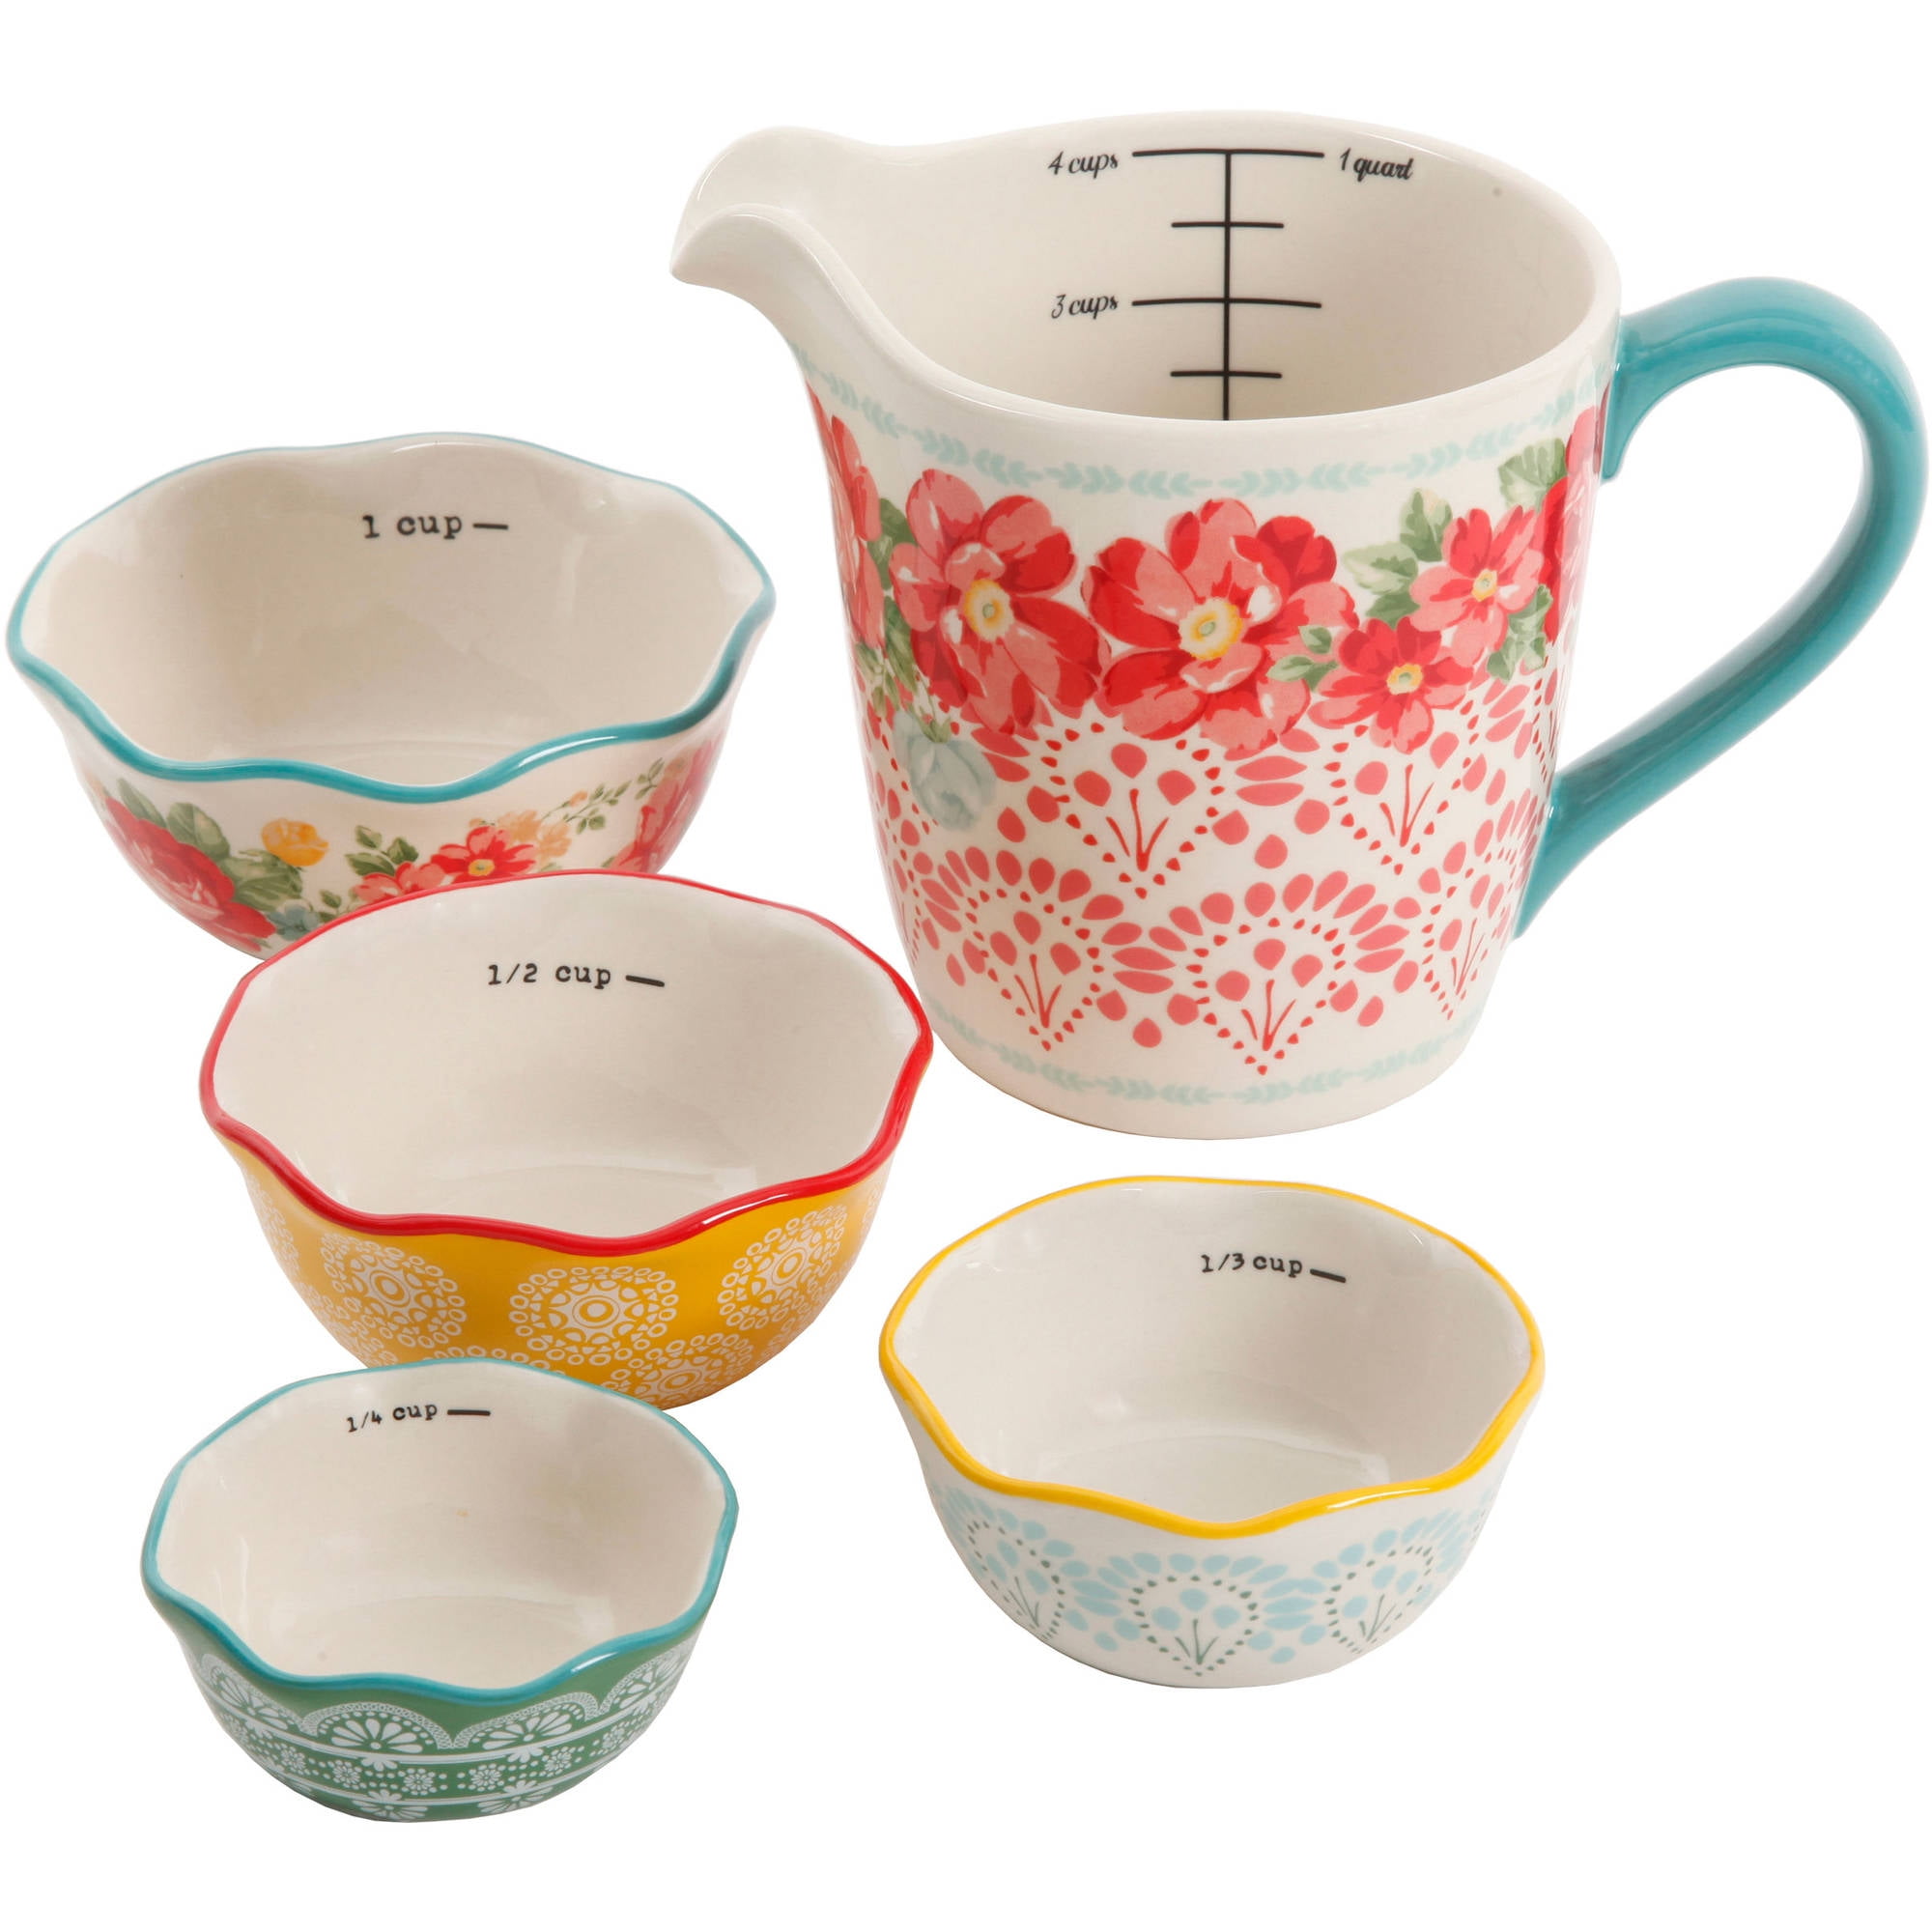 NEW The Pioneer Woman Breezy Blossom 4-piece Measuring Bowls - Measuring  Cups & Spoons, Facebook Marketplace